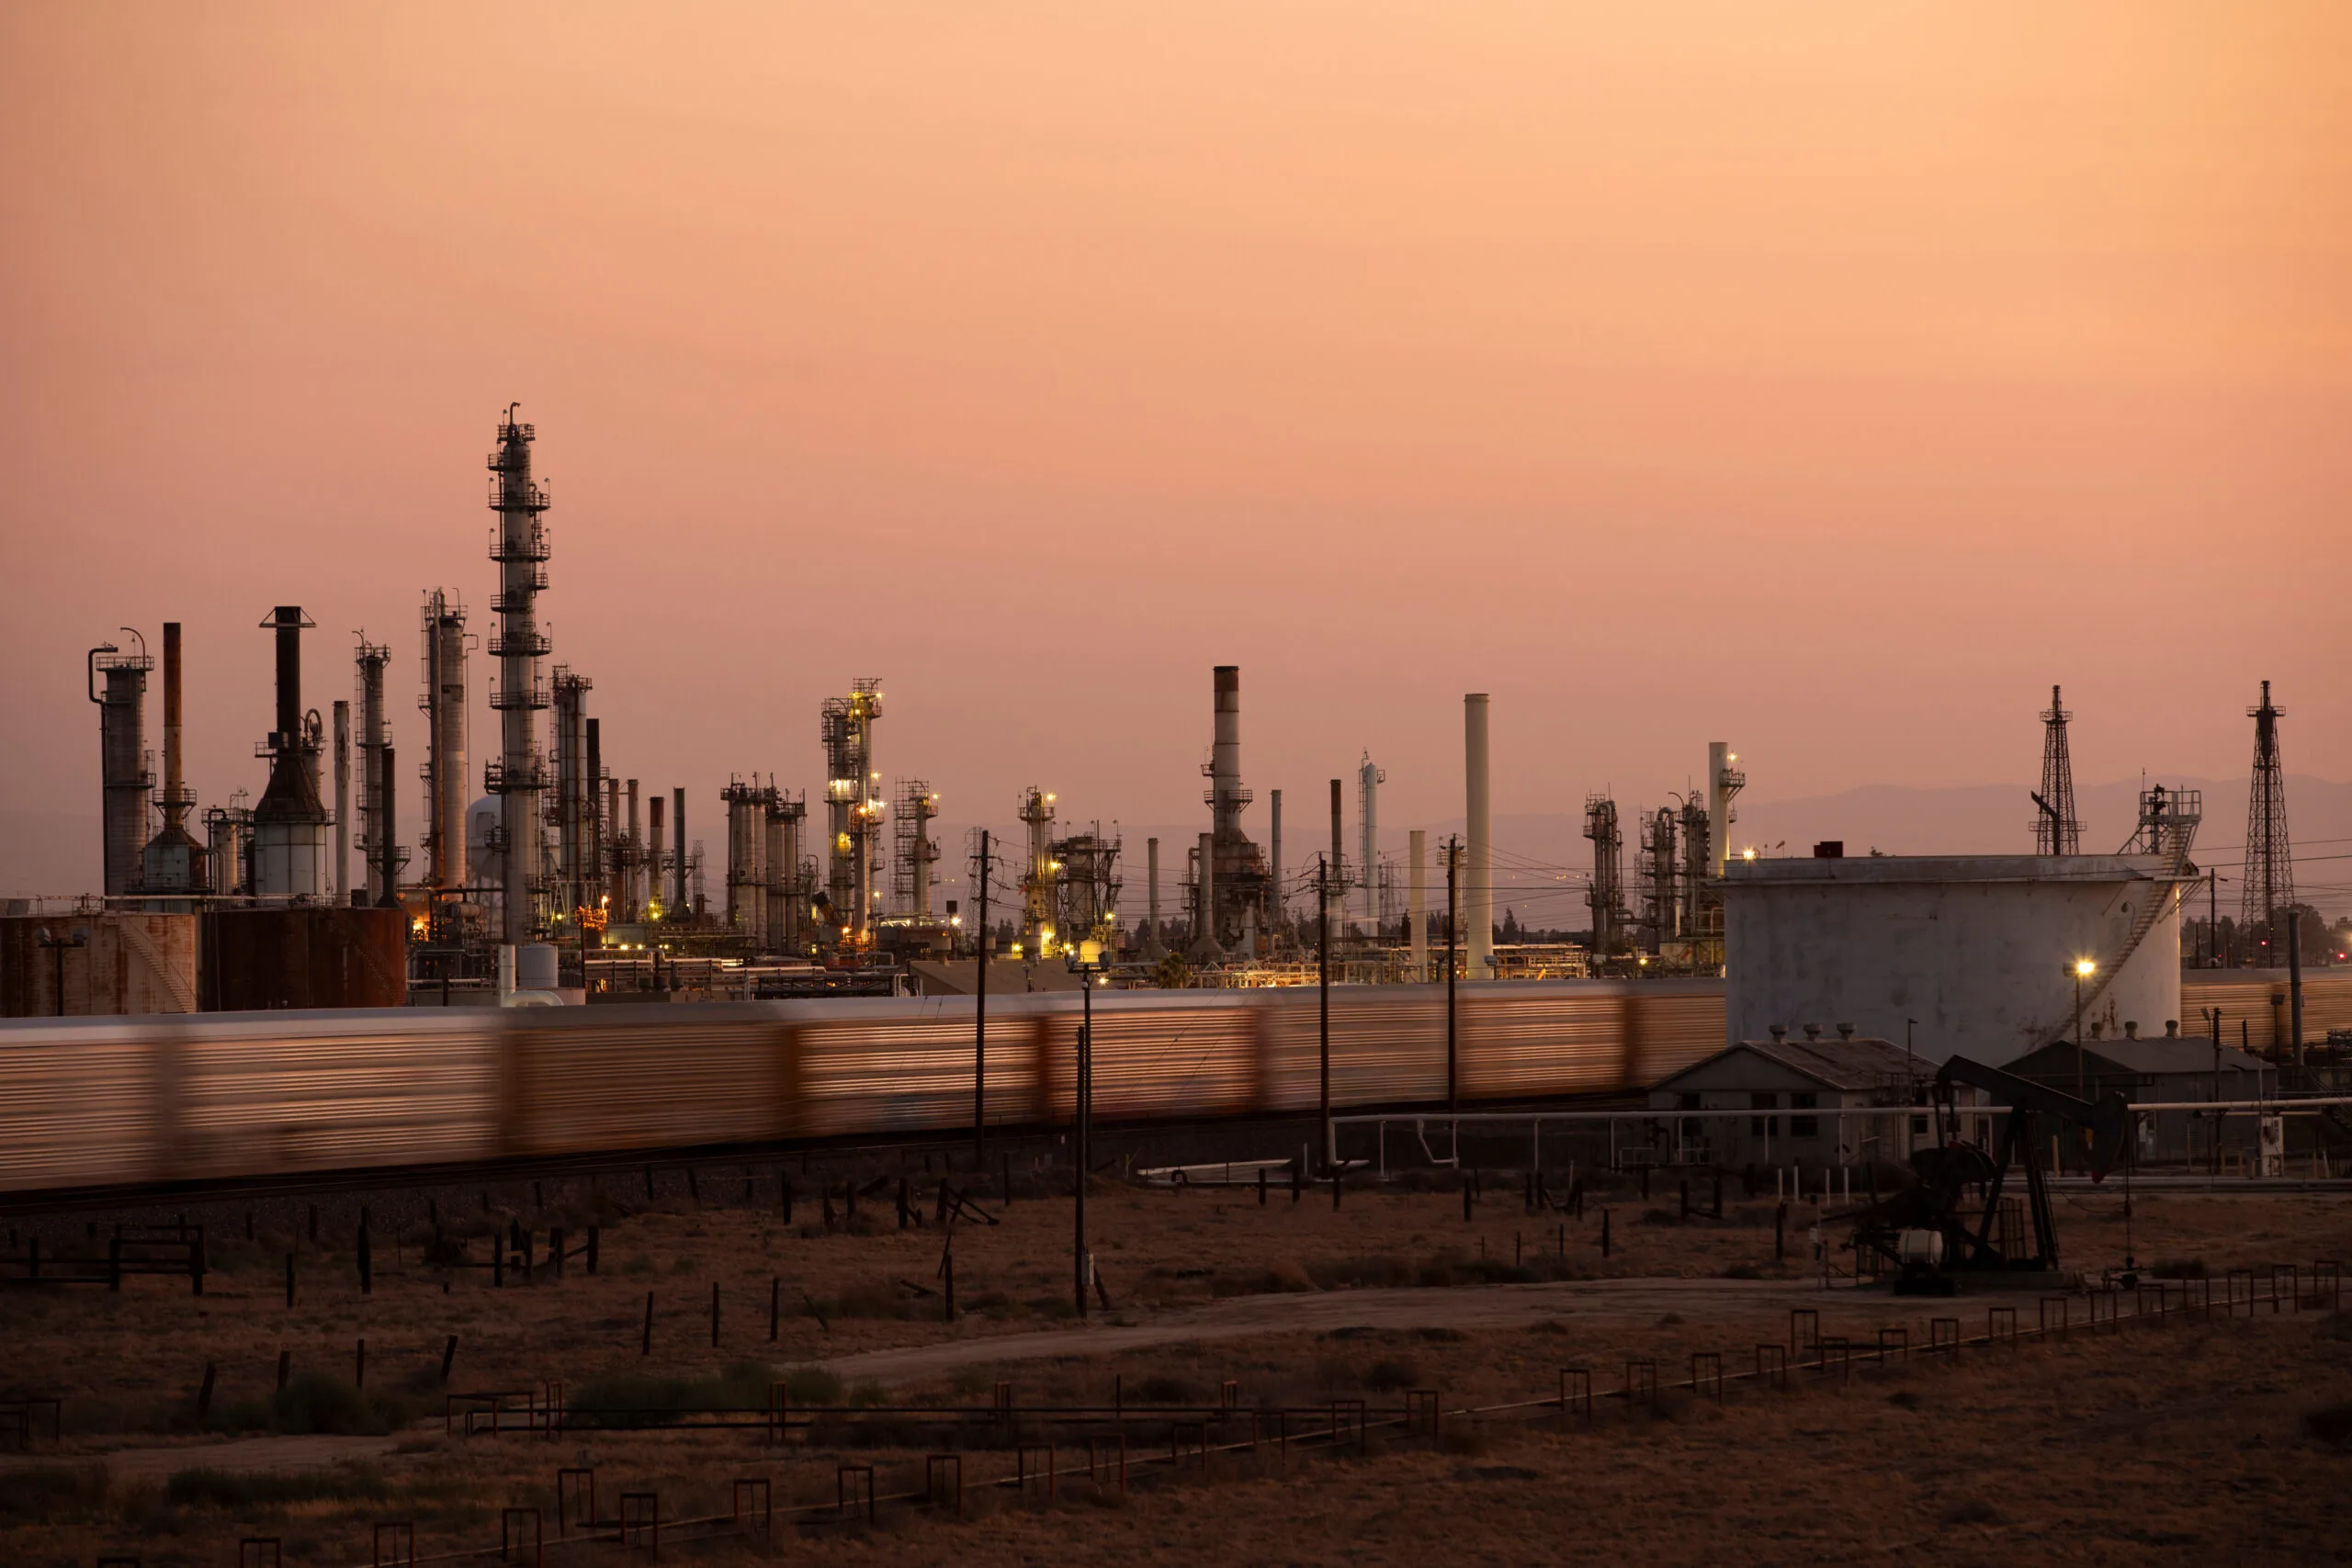 California wants to seize oil majors’ profits as climate damages - Gas Outlook